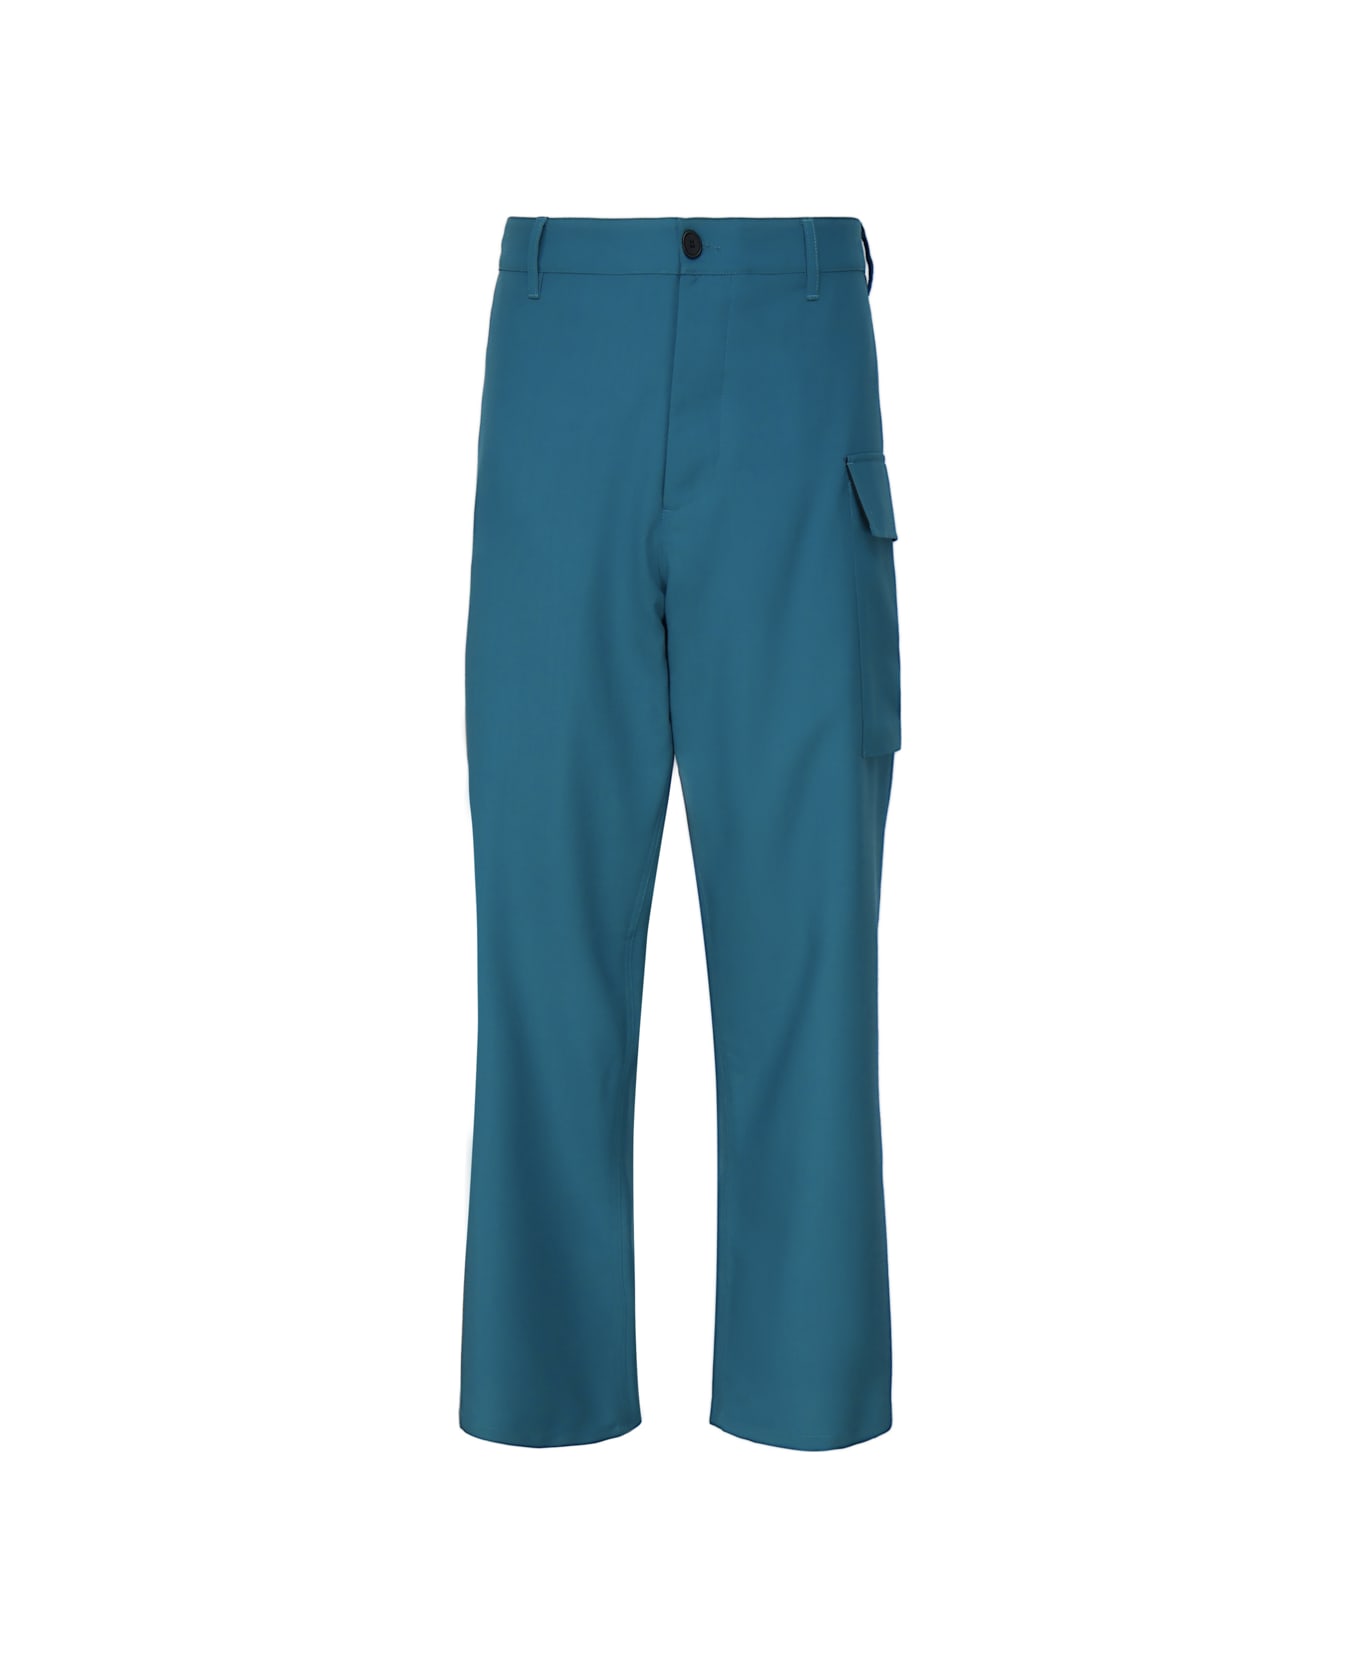 Marni Cool Wool Trousers With Cargo Pockets - Petrol blue ボトムス